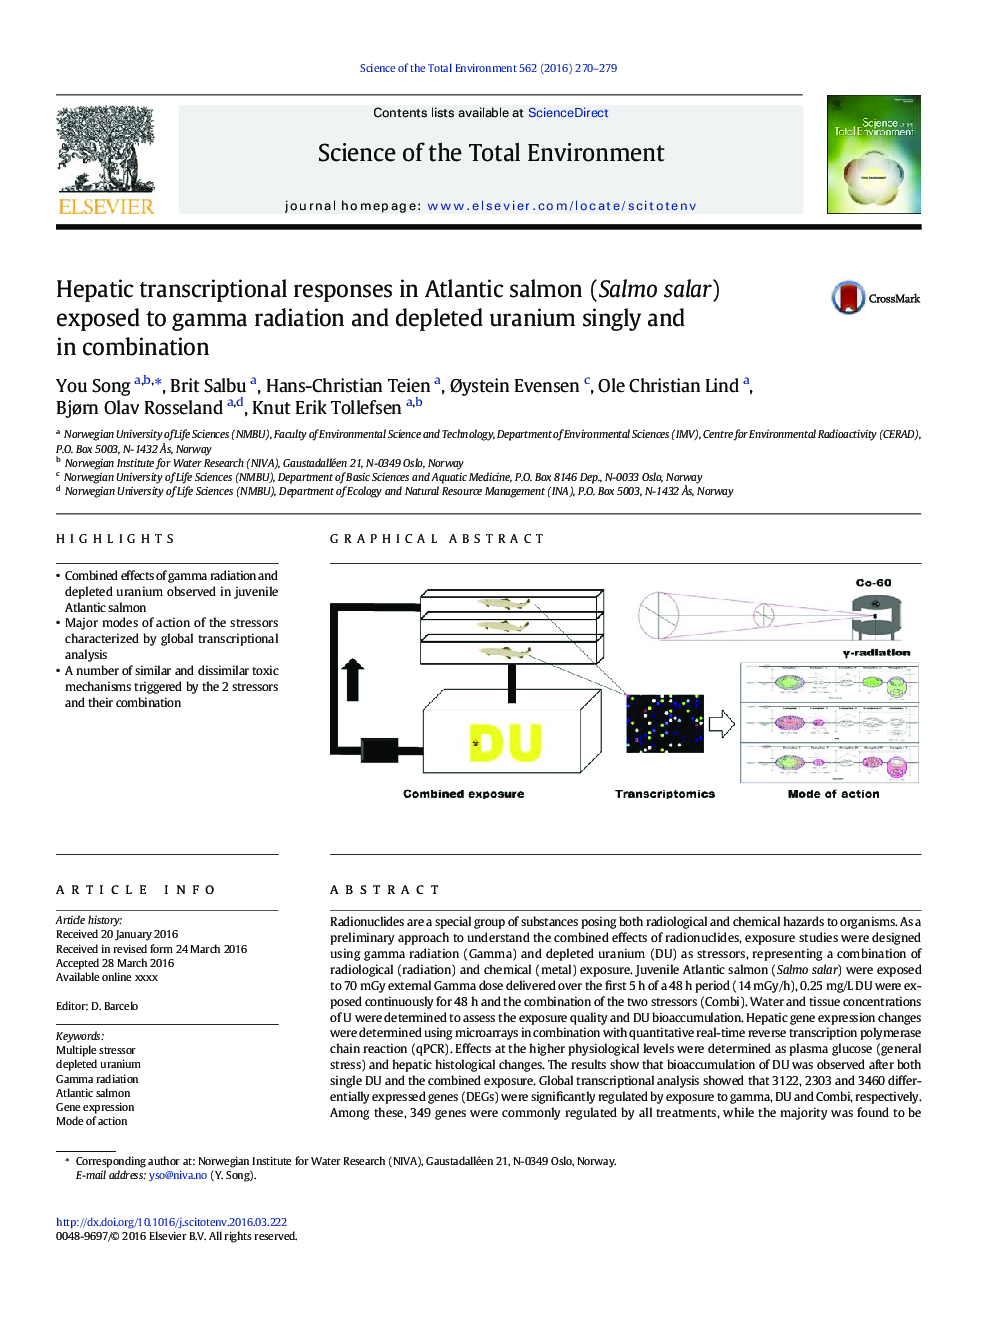 Hepatic transcriptional responses in Atlantic salmon (Salmo salar) exposed to gamma radiation and depleted uranium singly and in combination